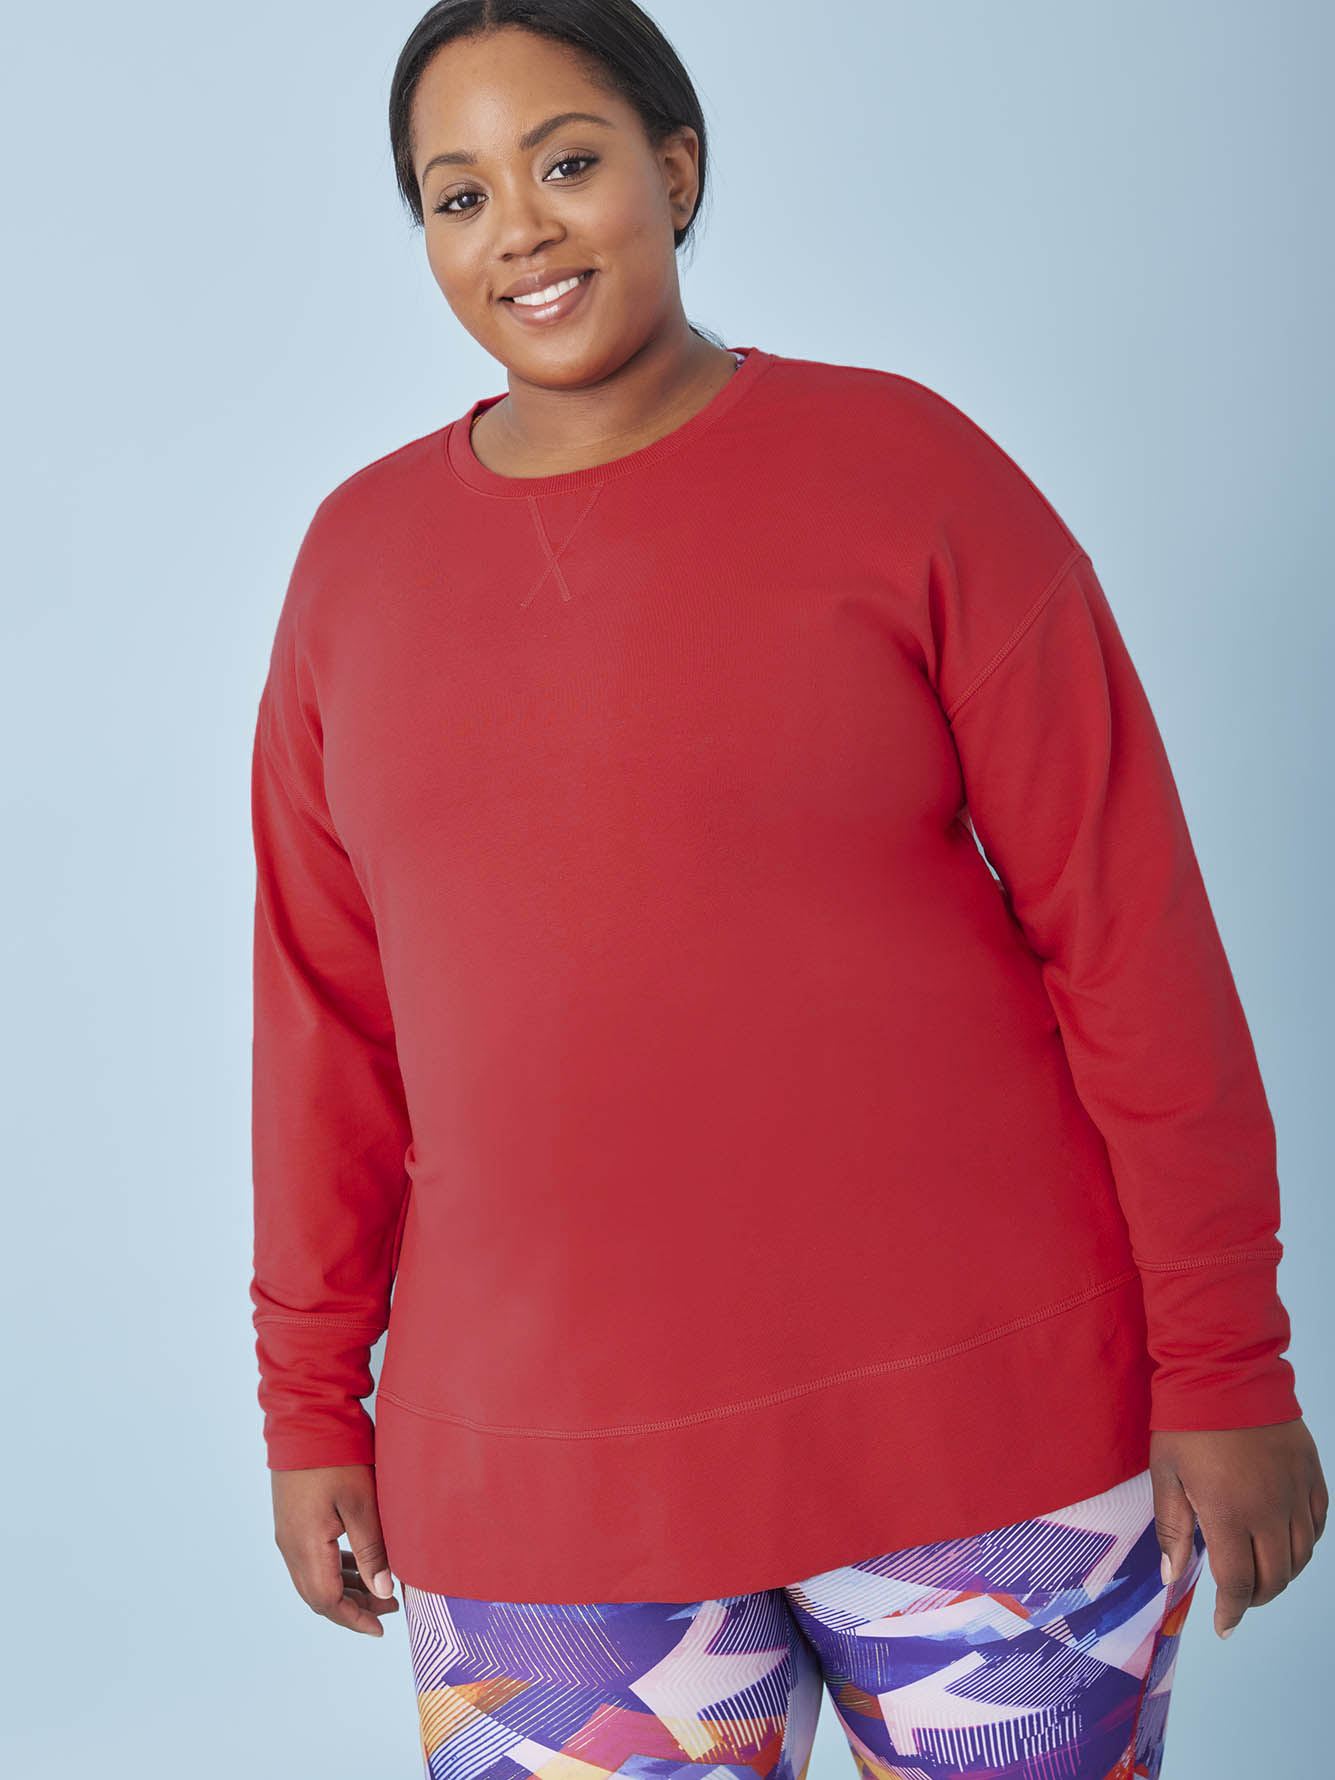 French Terry Crewneck Tunic - Active Zone